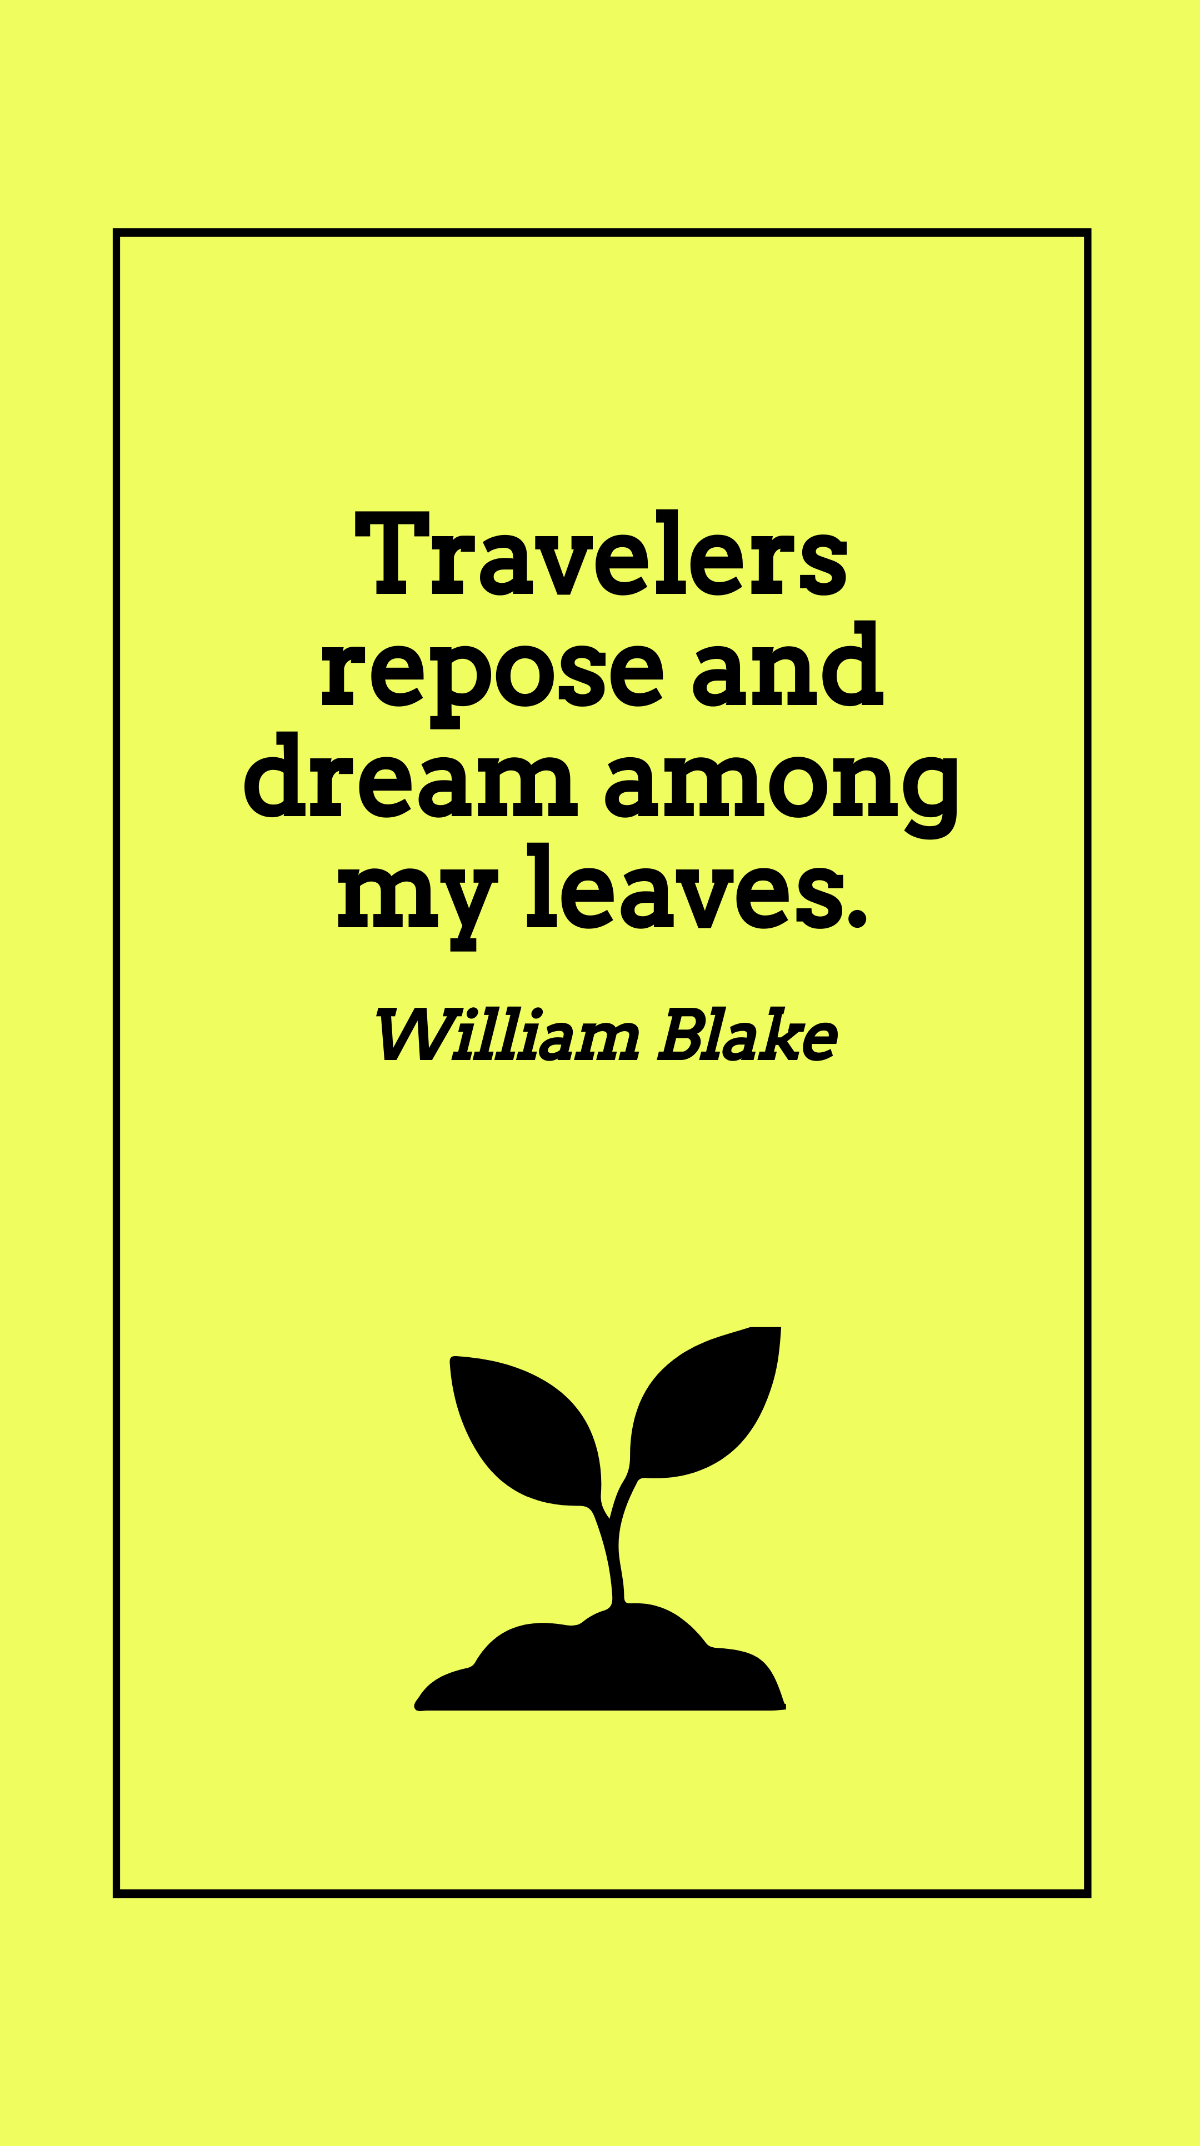 William Blake - Travelers repose and dream among my leaves. Template